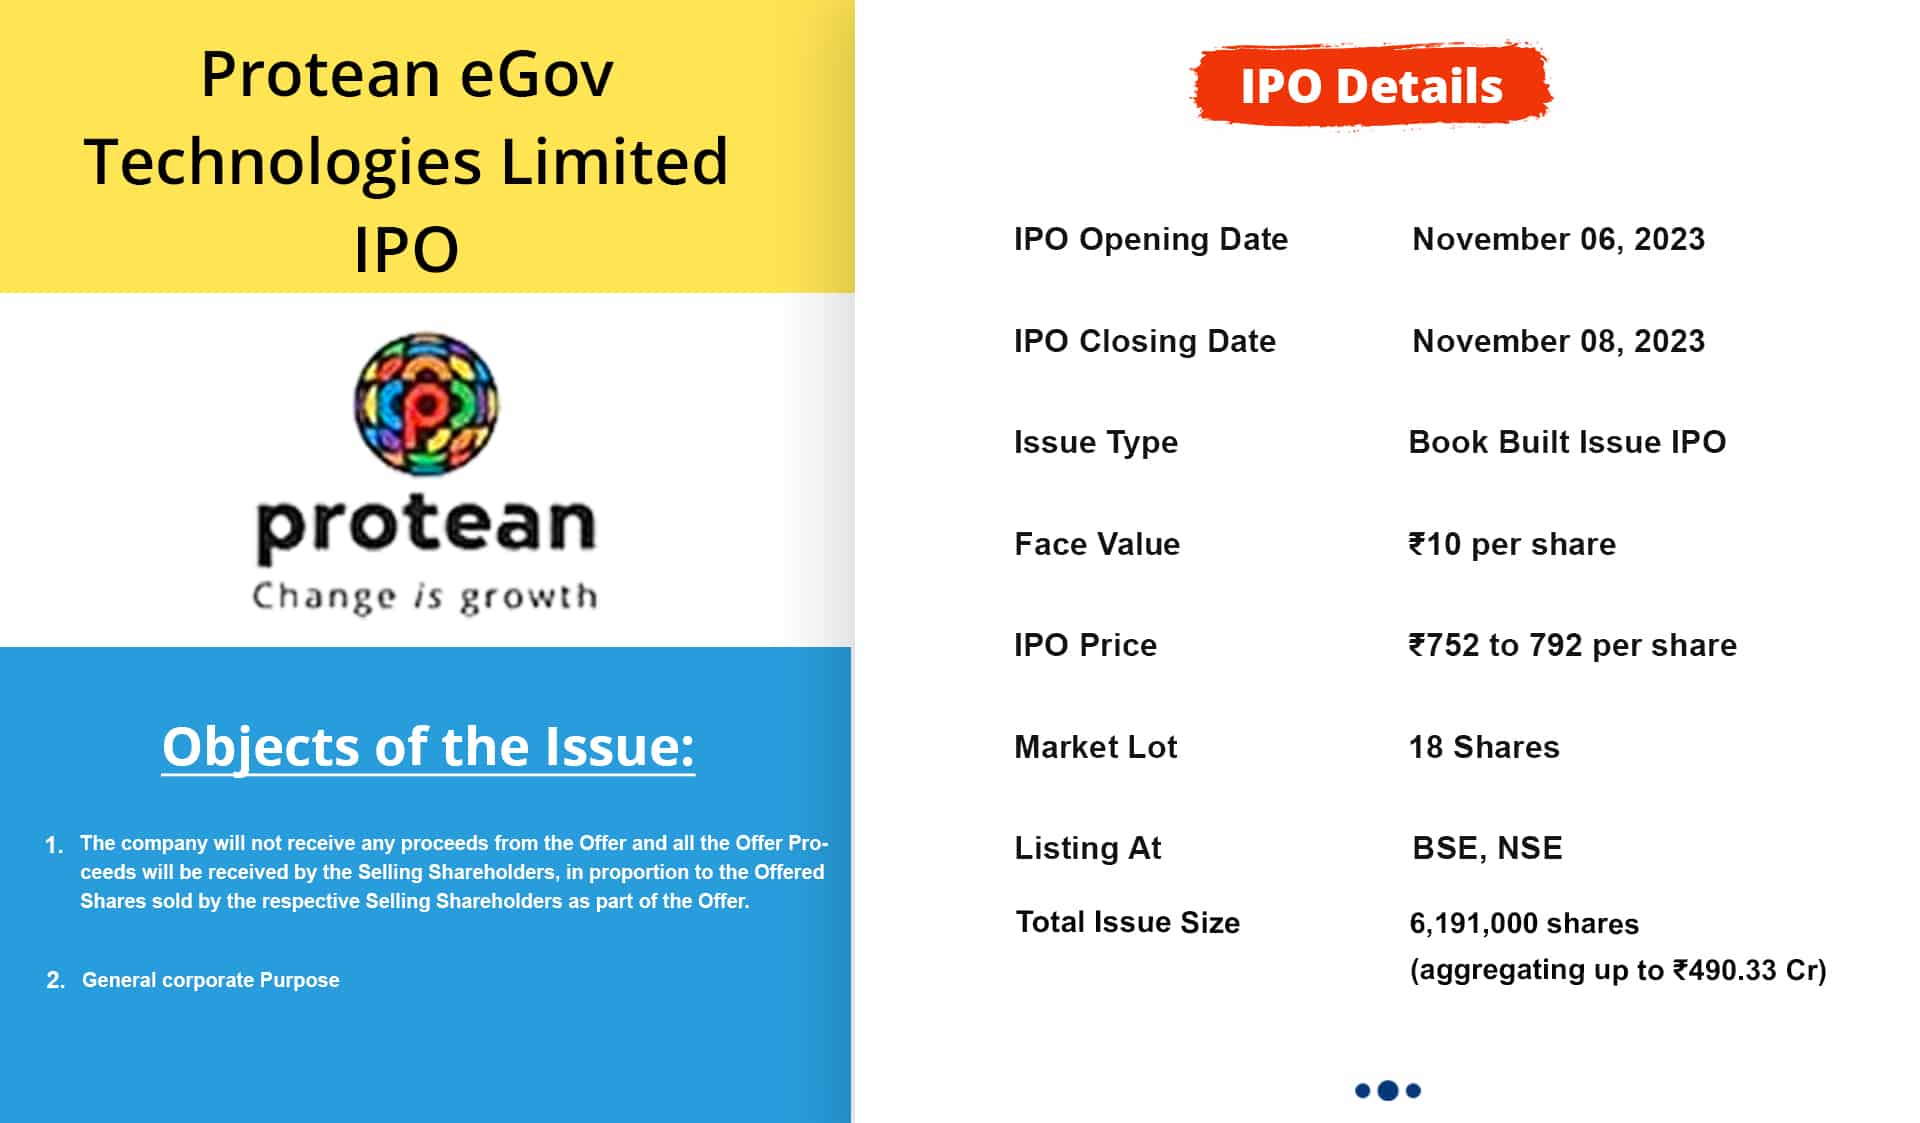 Protean eGov Technologies Limited IPO